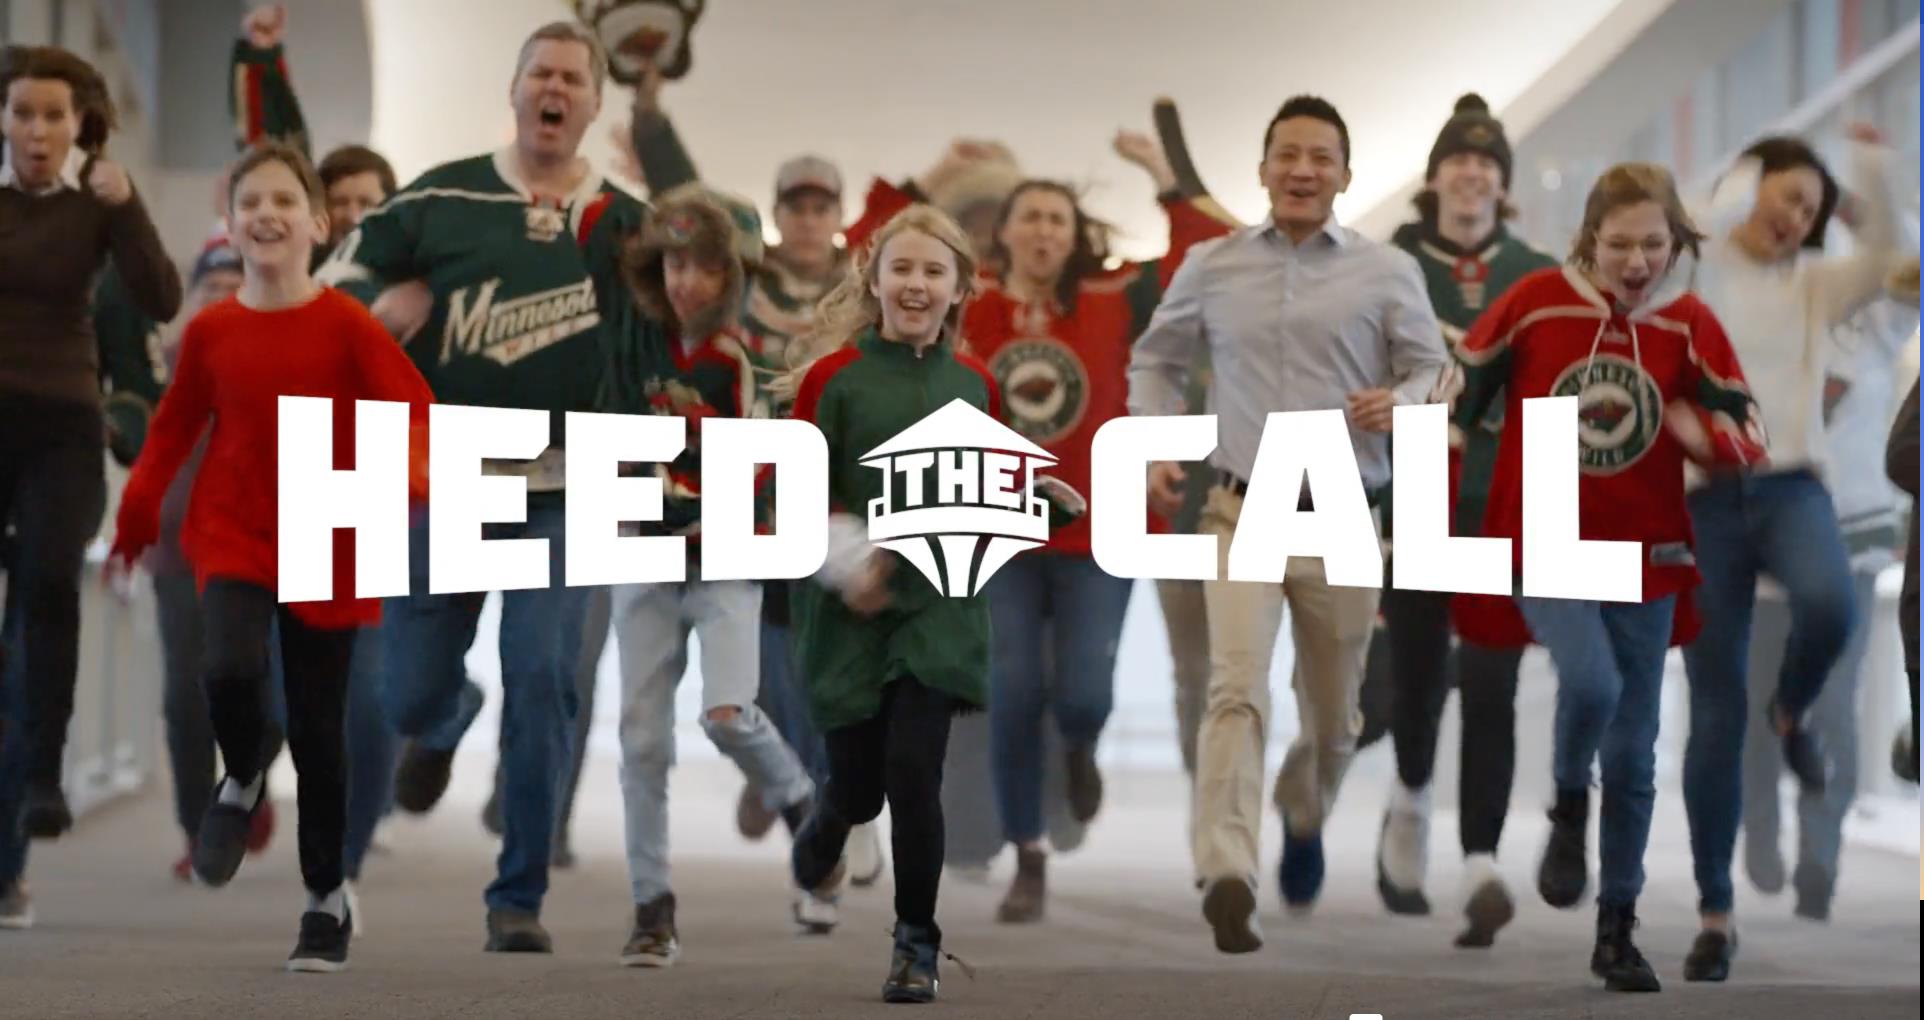 Minnesota Wild Fans Beckoned to “Heed the Call”